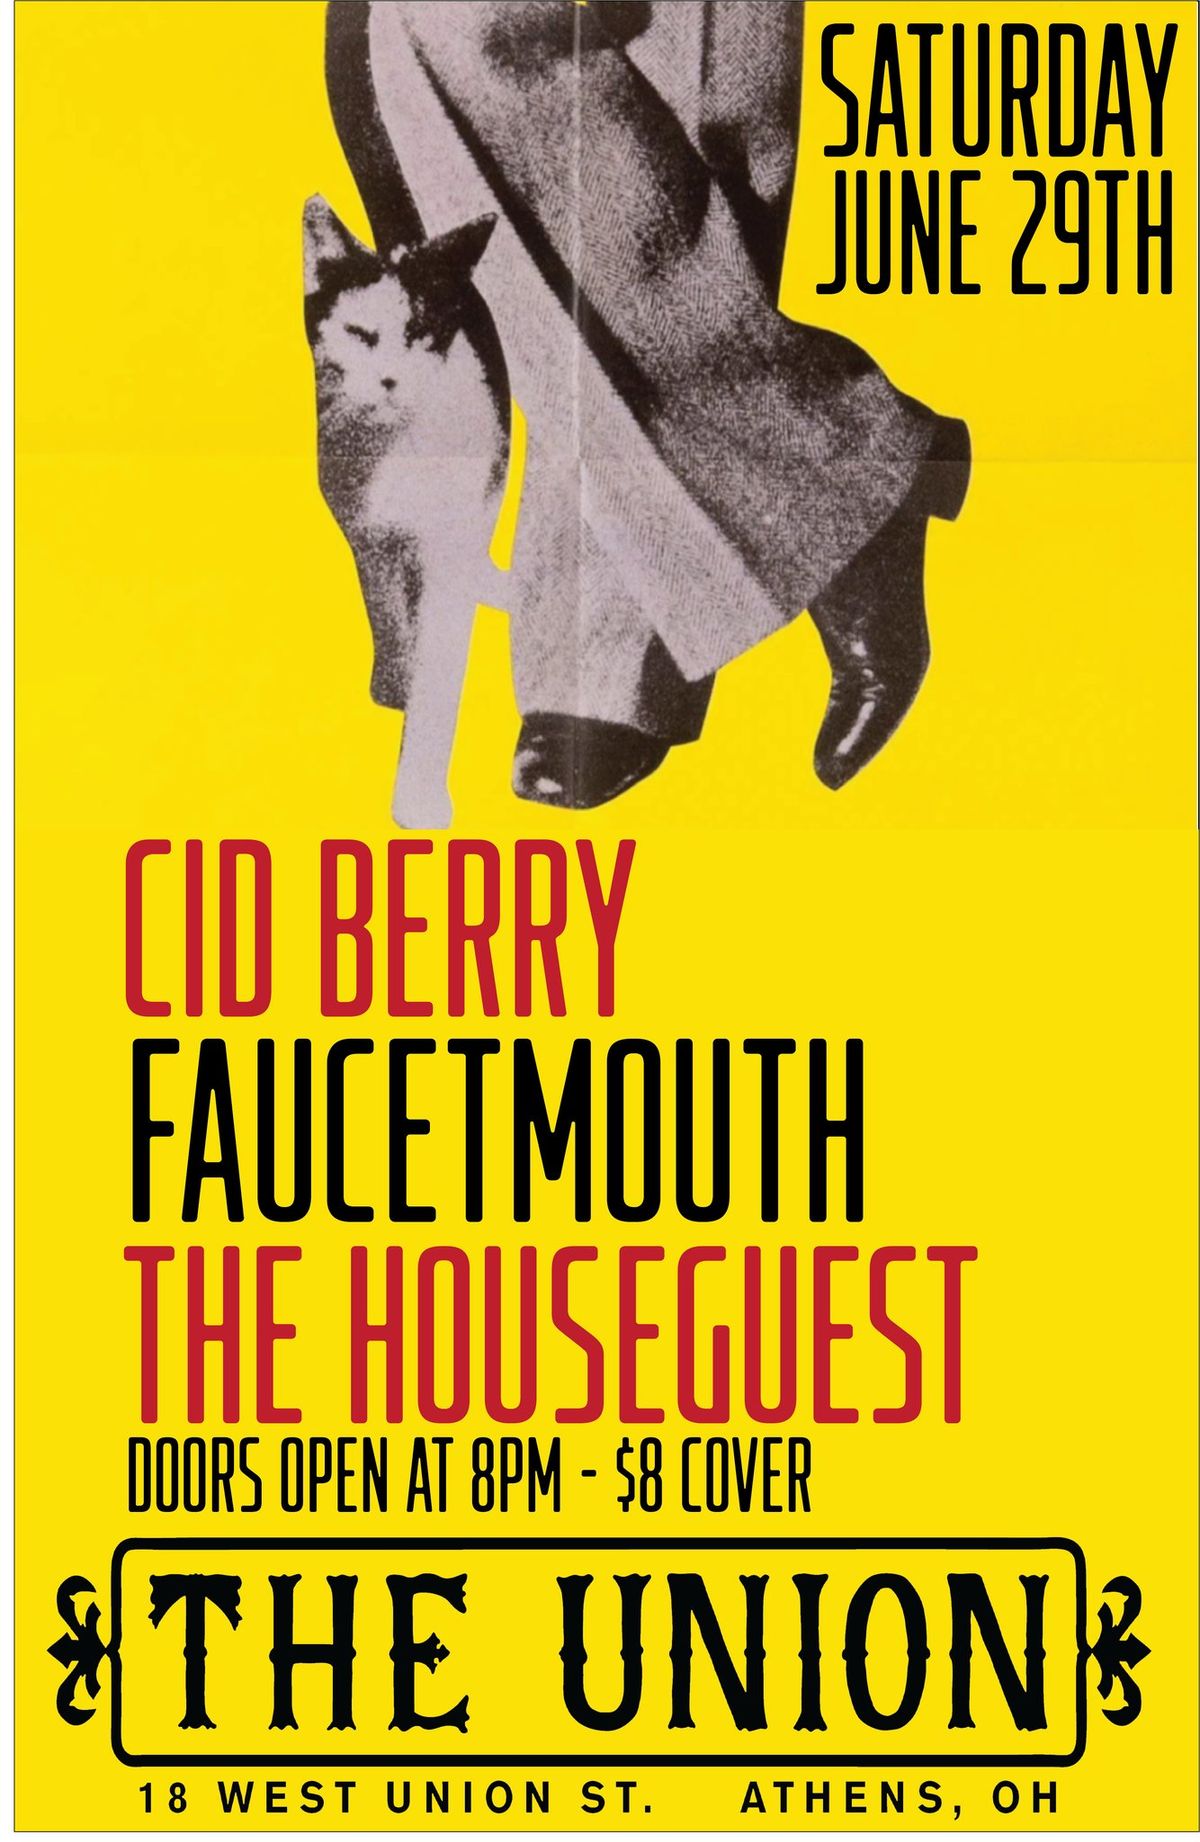 CID BERRY, FAUCETMOUTH, THE HOUSEGUEST